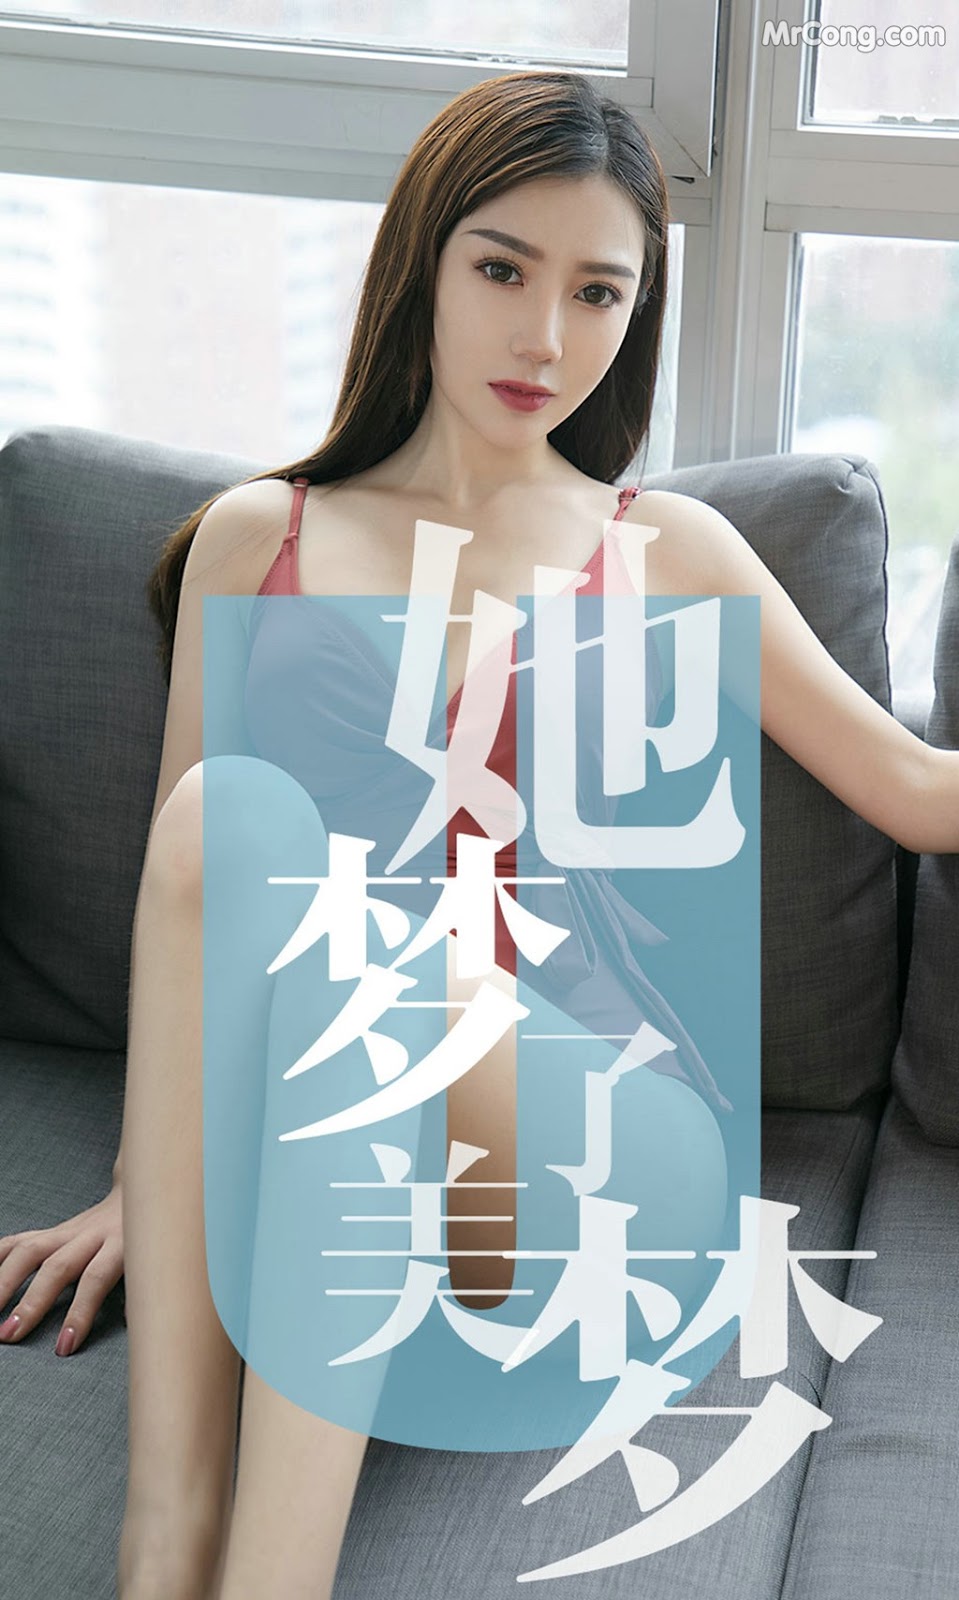 UGIRLS - Ai You Wu App No.1468: Chen Meng (陈梦) (35 pictures)